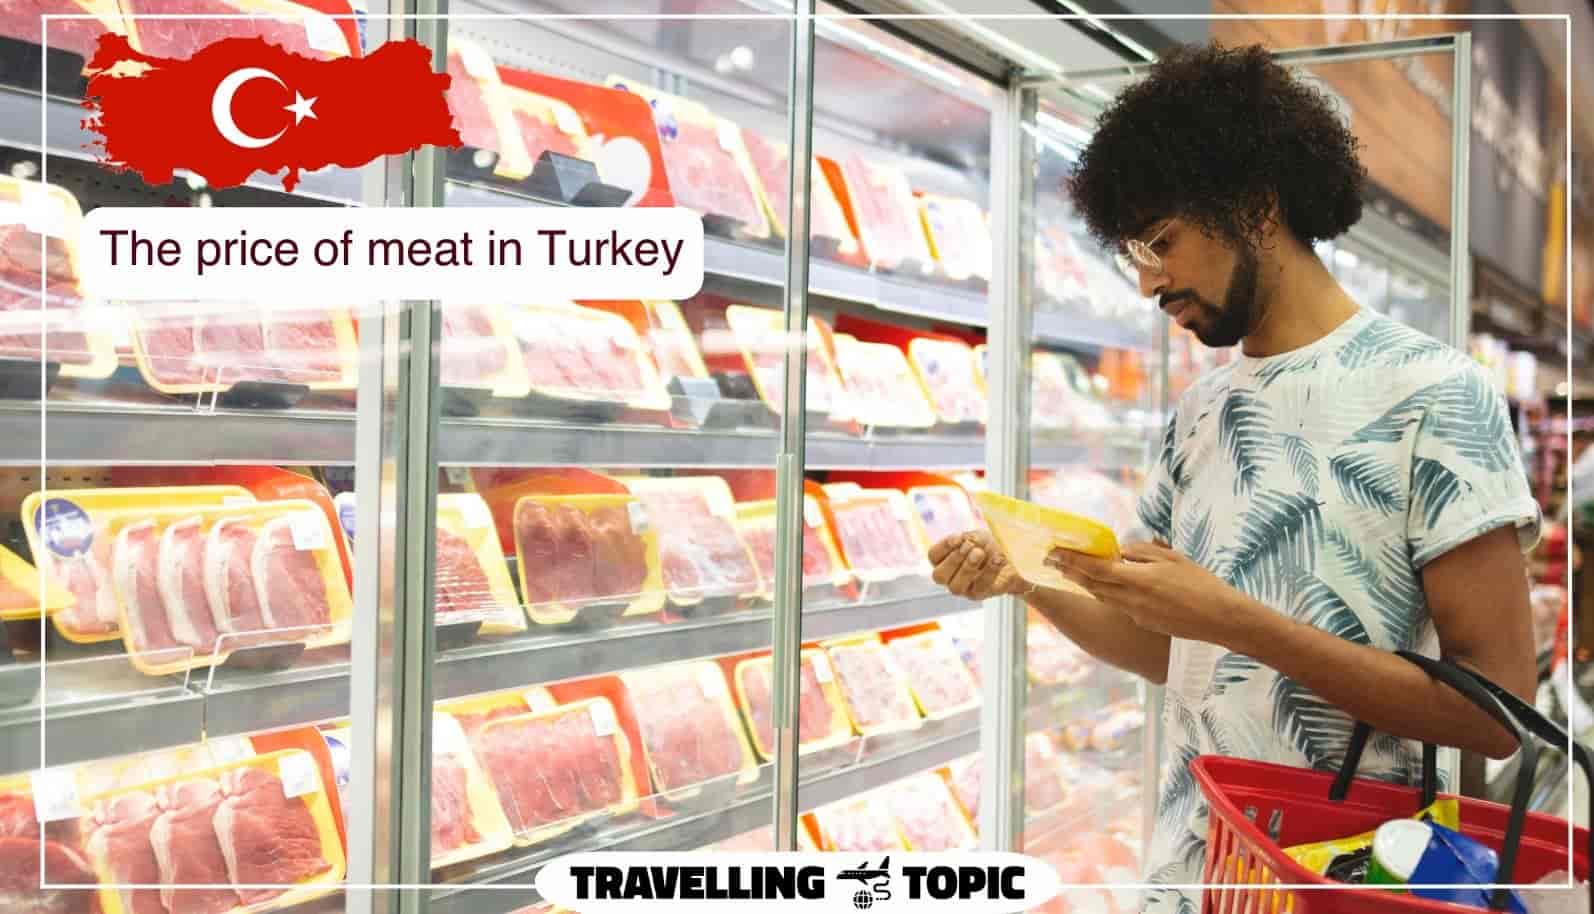 The price of meat in Turkey